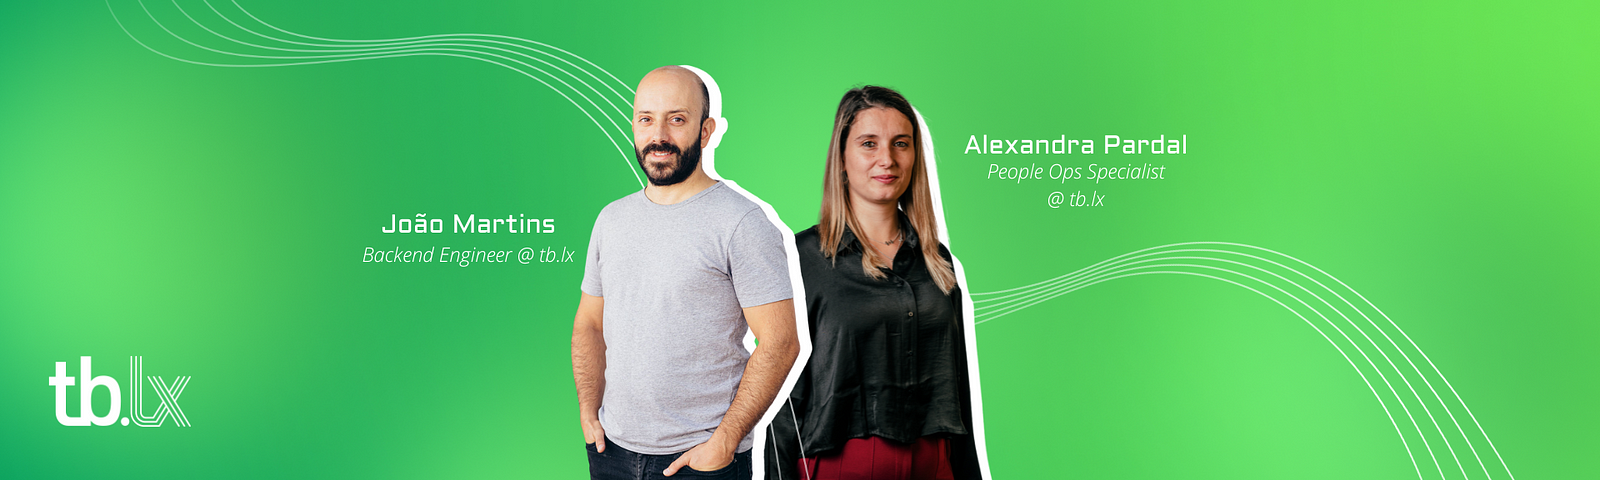 A green background with a photo of João Martins, a Backend Engineer at tb.lx and a photo of Alexandra Pardal, a People Ops Specialist at tb.lx